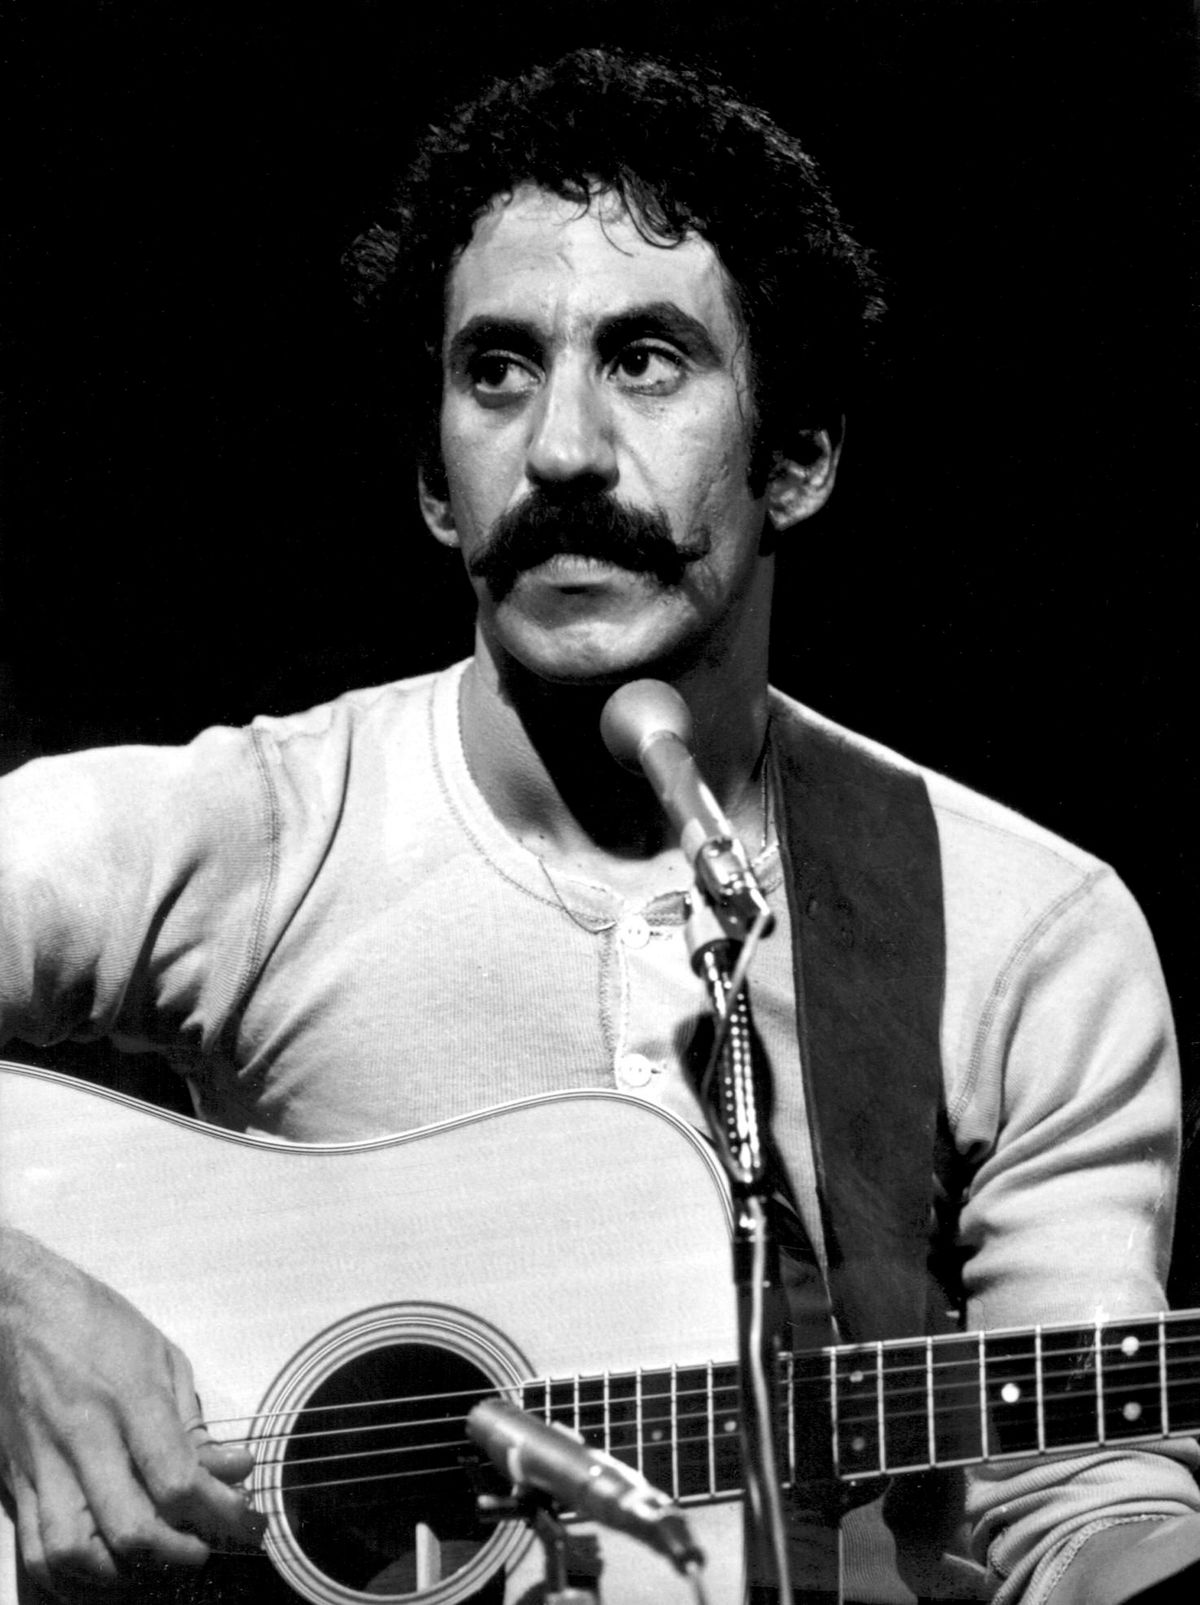 Jim Croce onstage during an appearance on Kenny Rogers